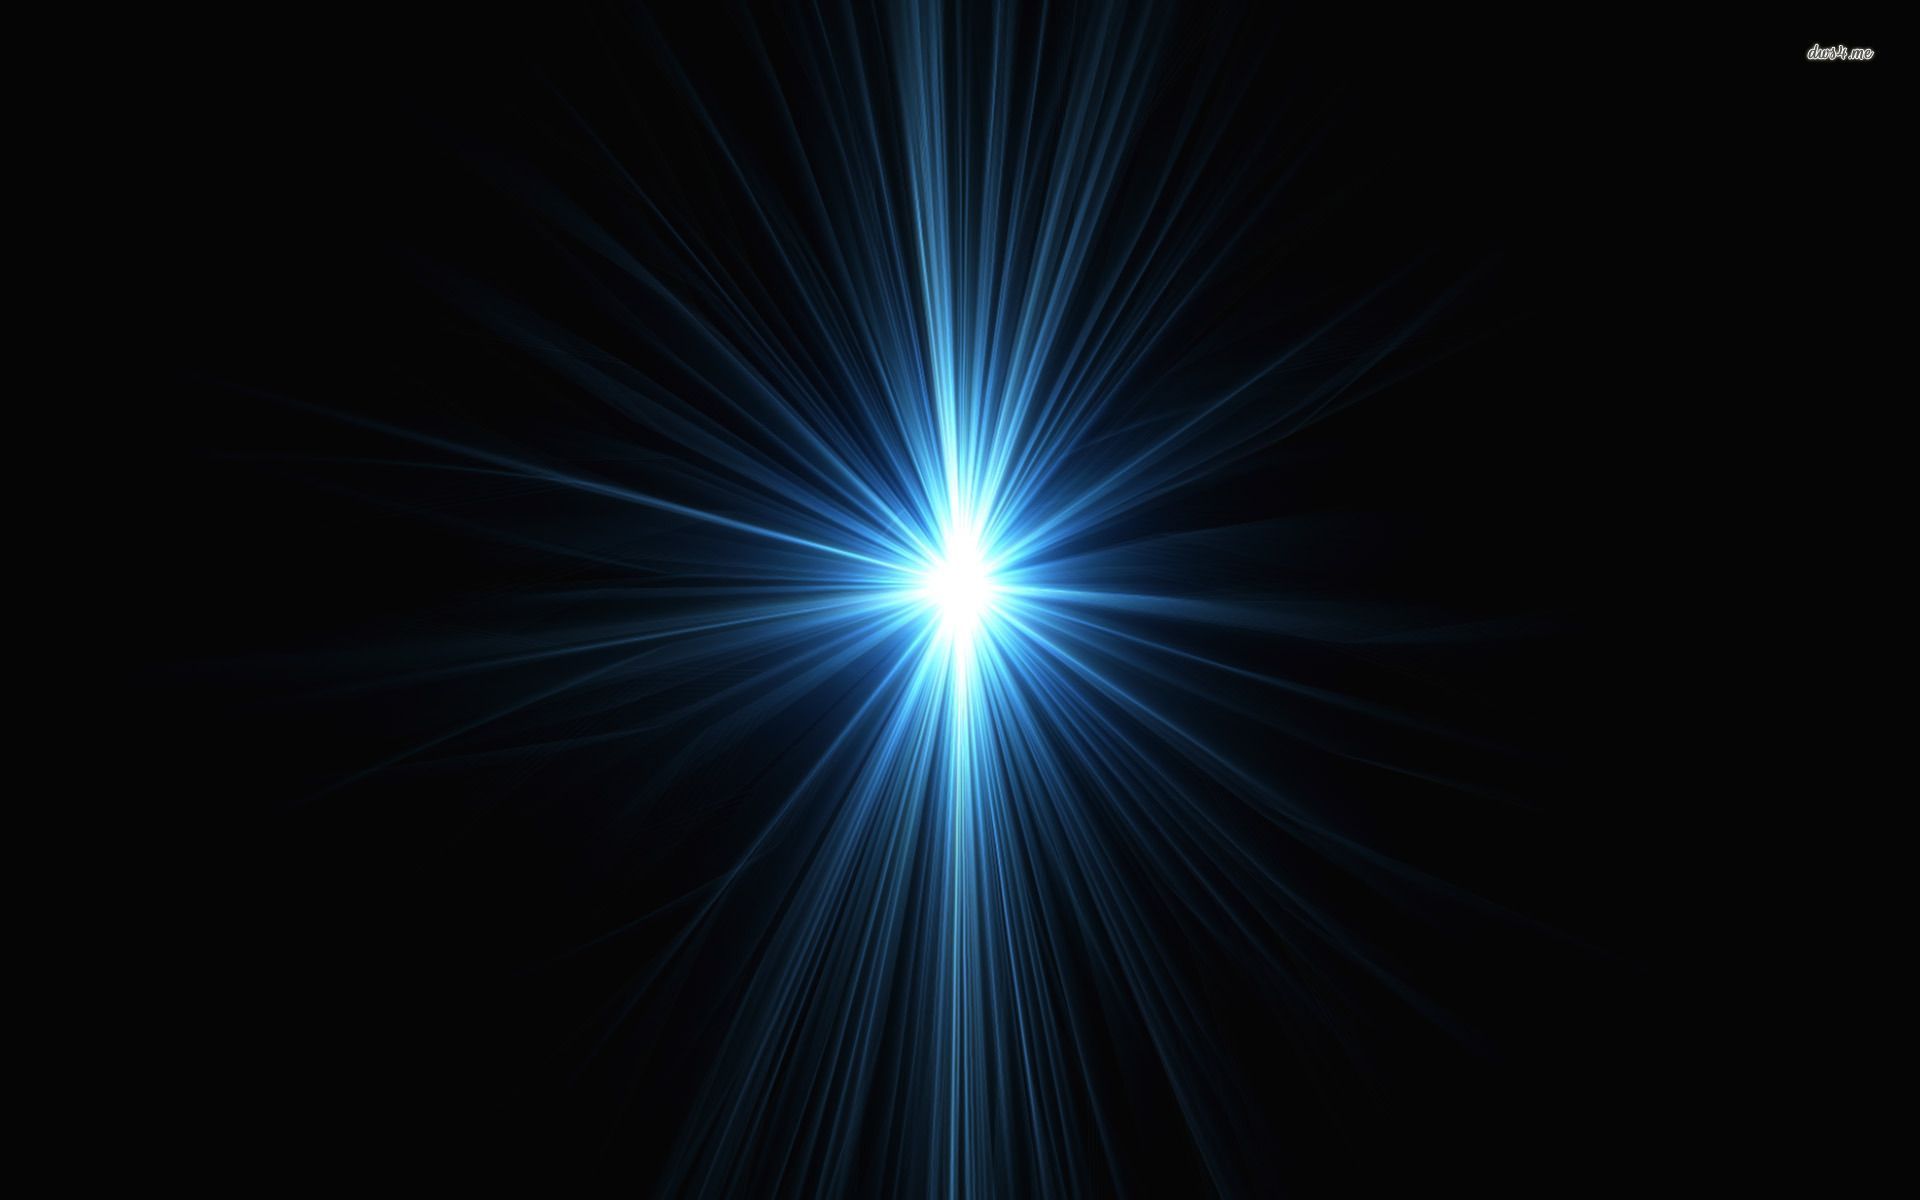 Blue Light Source wallpaper - Abstract wallpapers - #3462